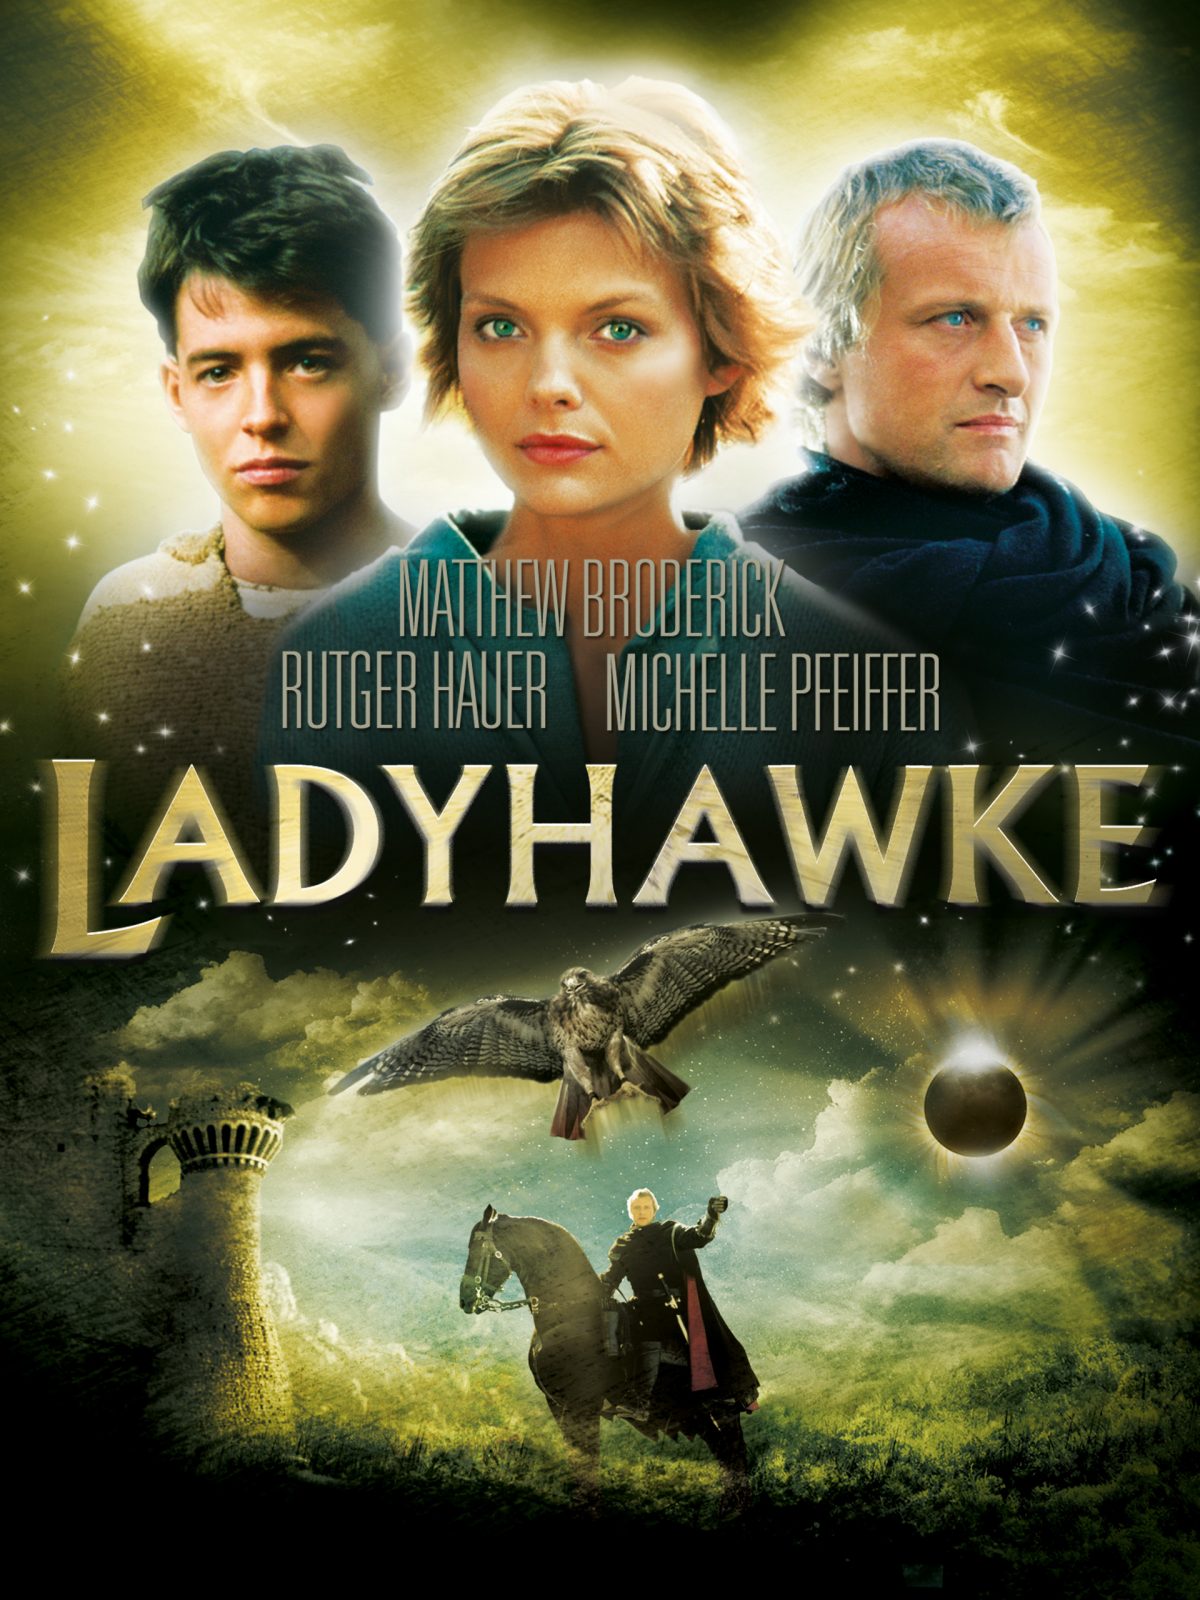 LadyHawke – A Must See